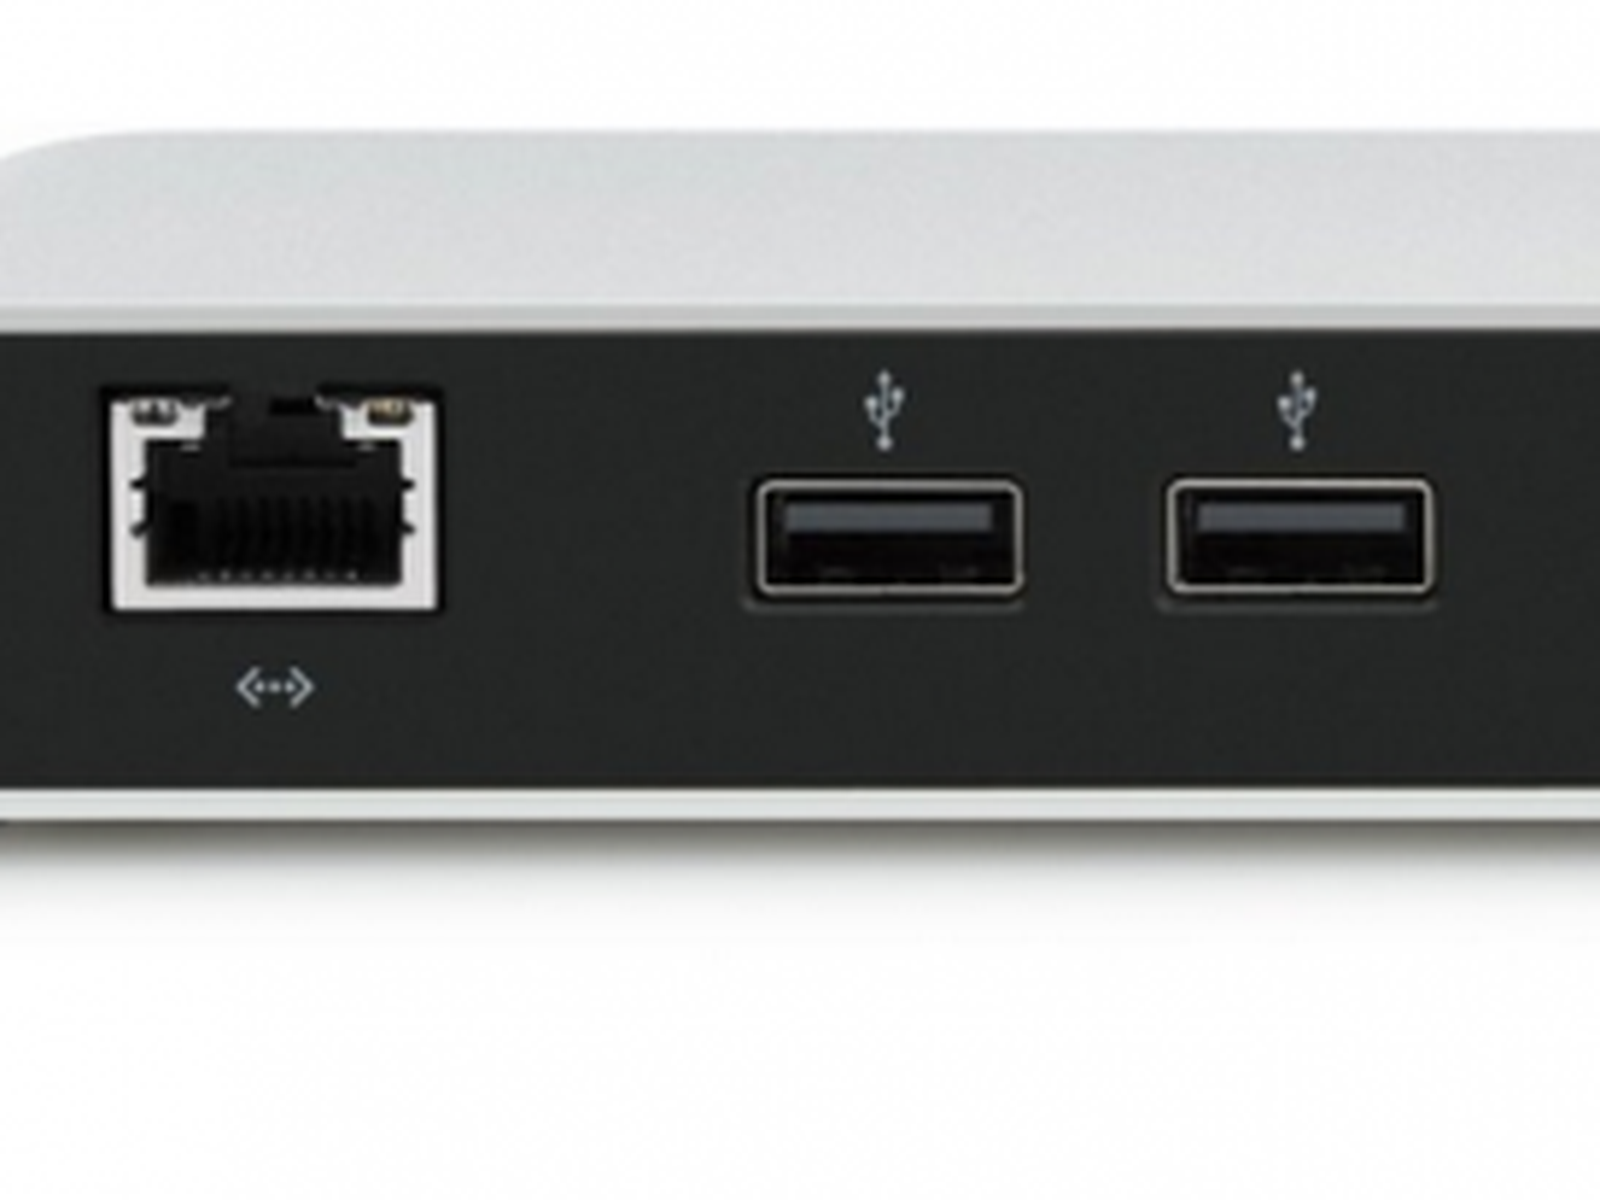 Elgato Launches Thunderbolt 2 Dock with 4K Resolution Support